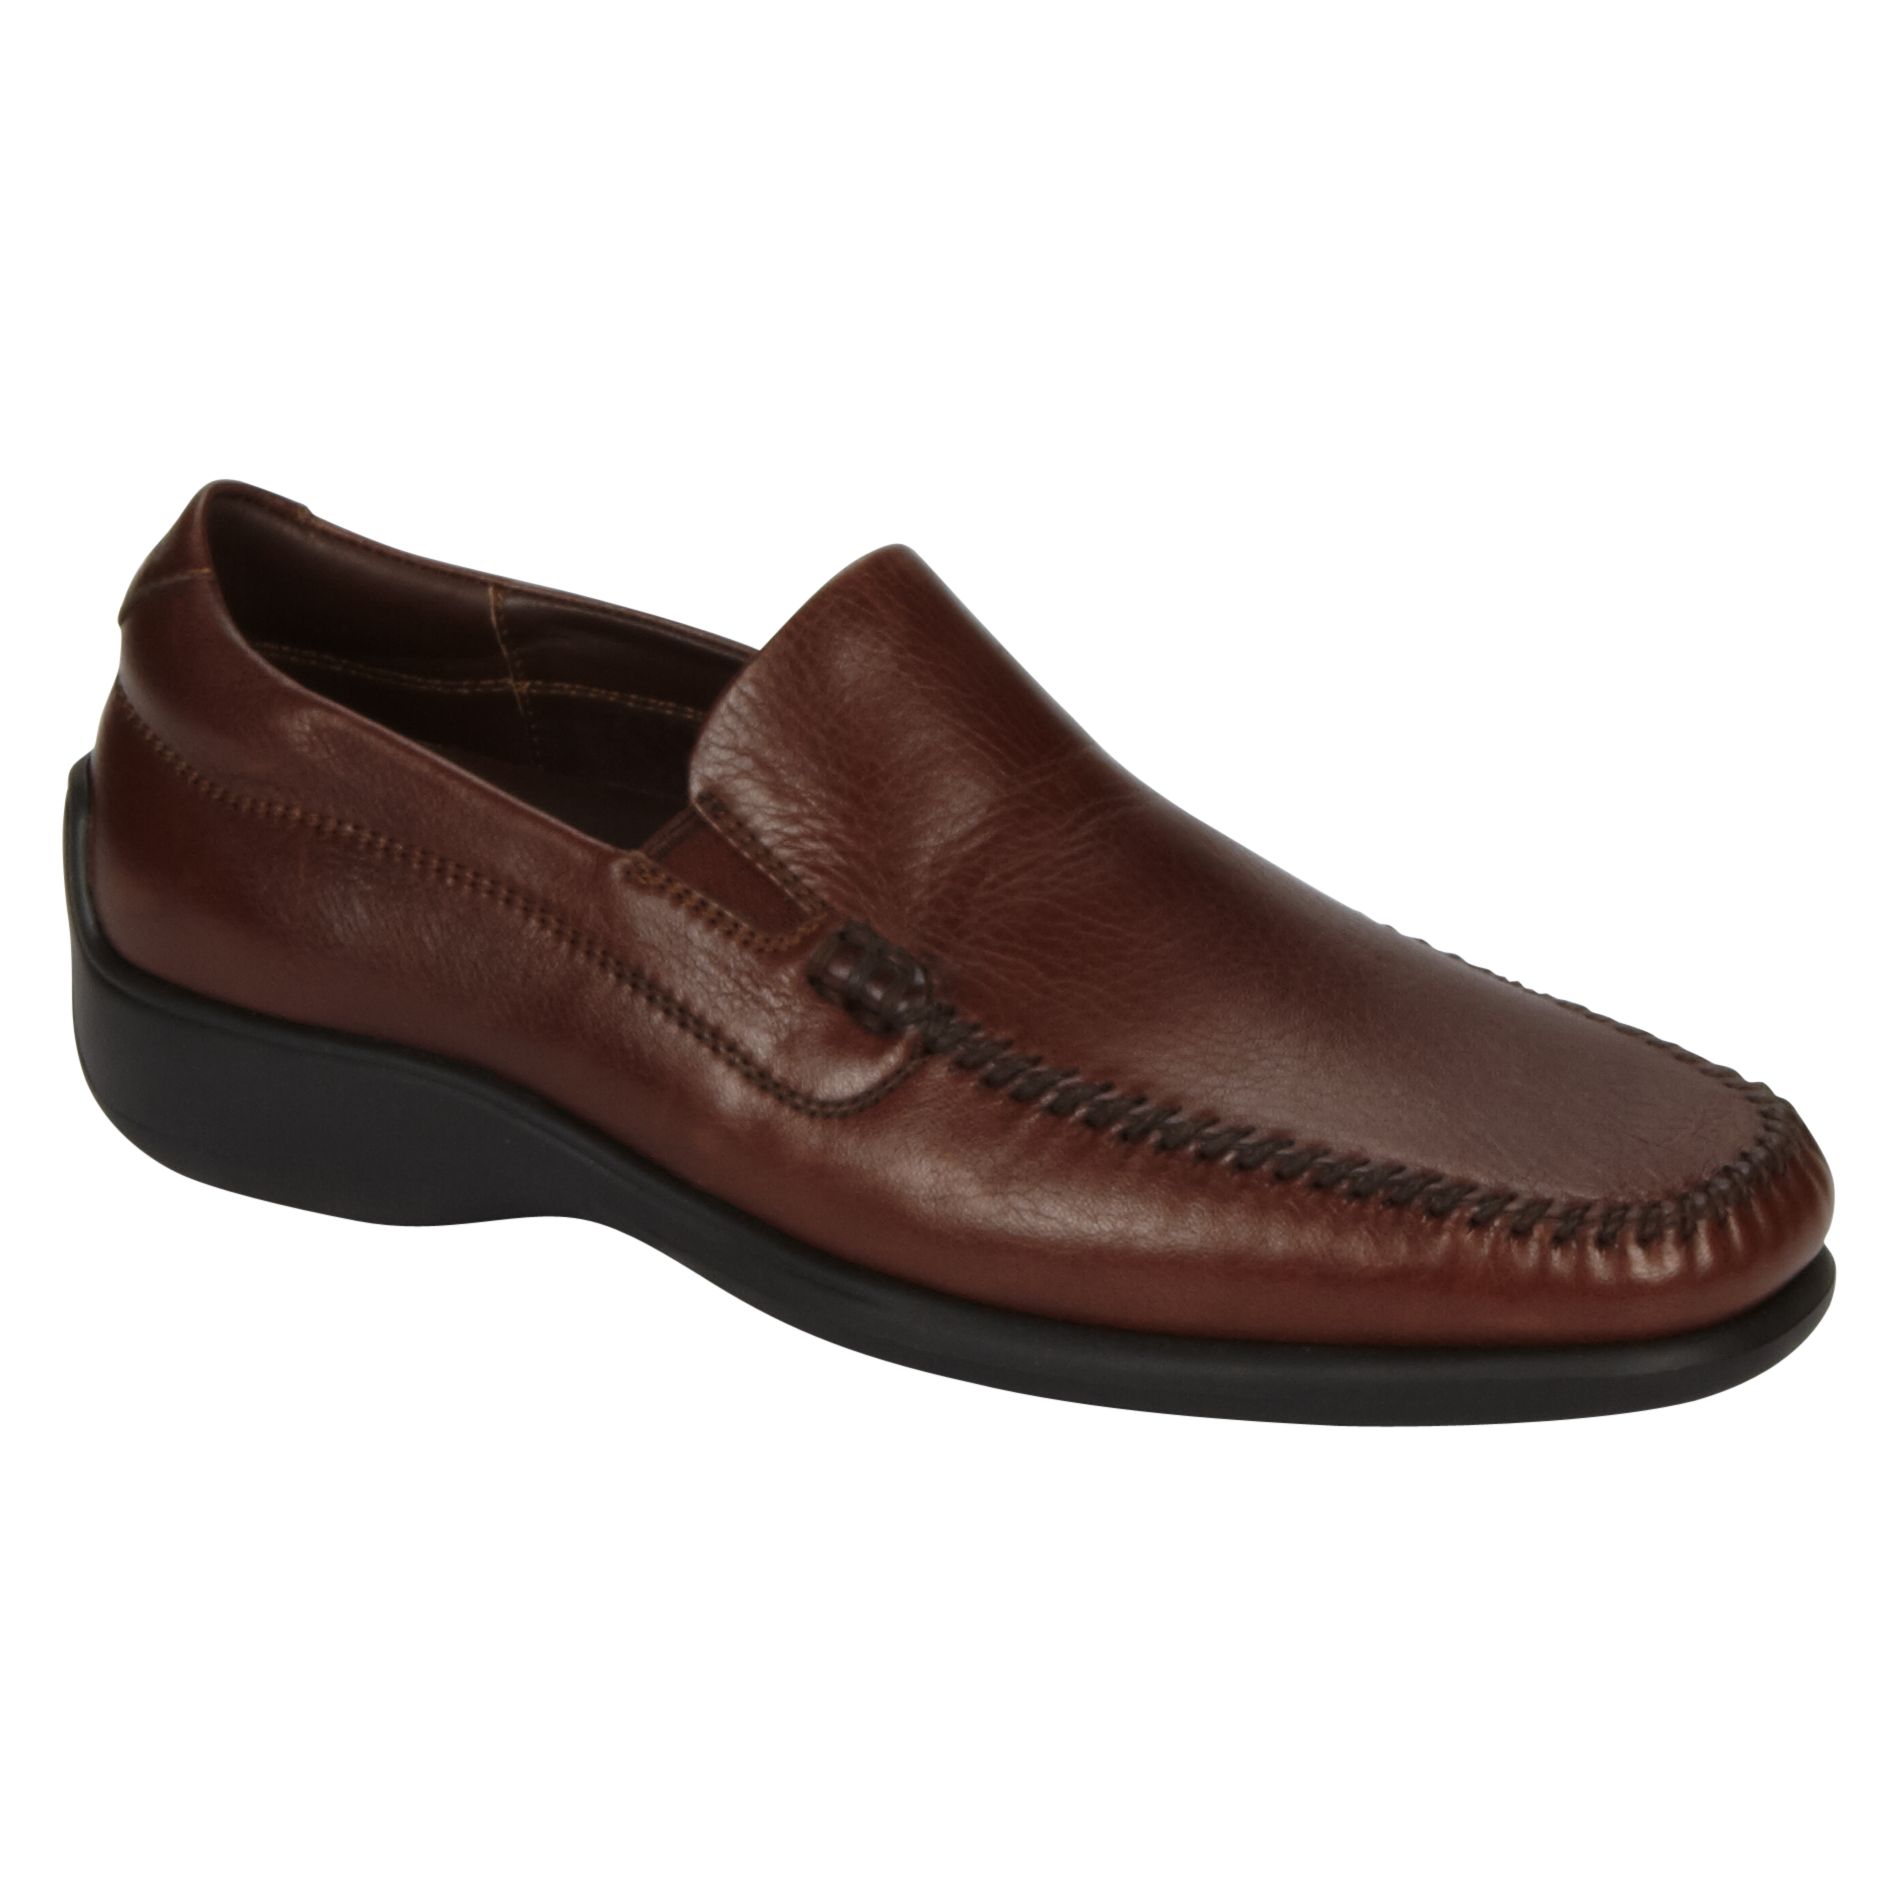 Men's Brown Gbx Jack Oxford: Buy Stylish Men's Shoes at Sears